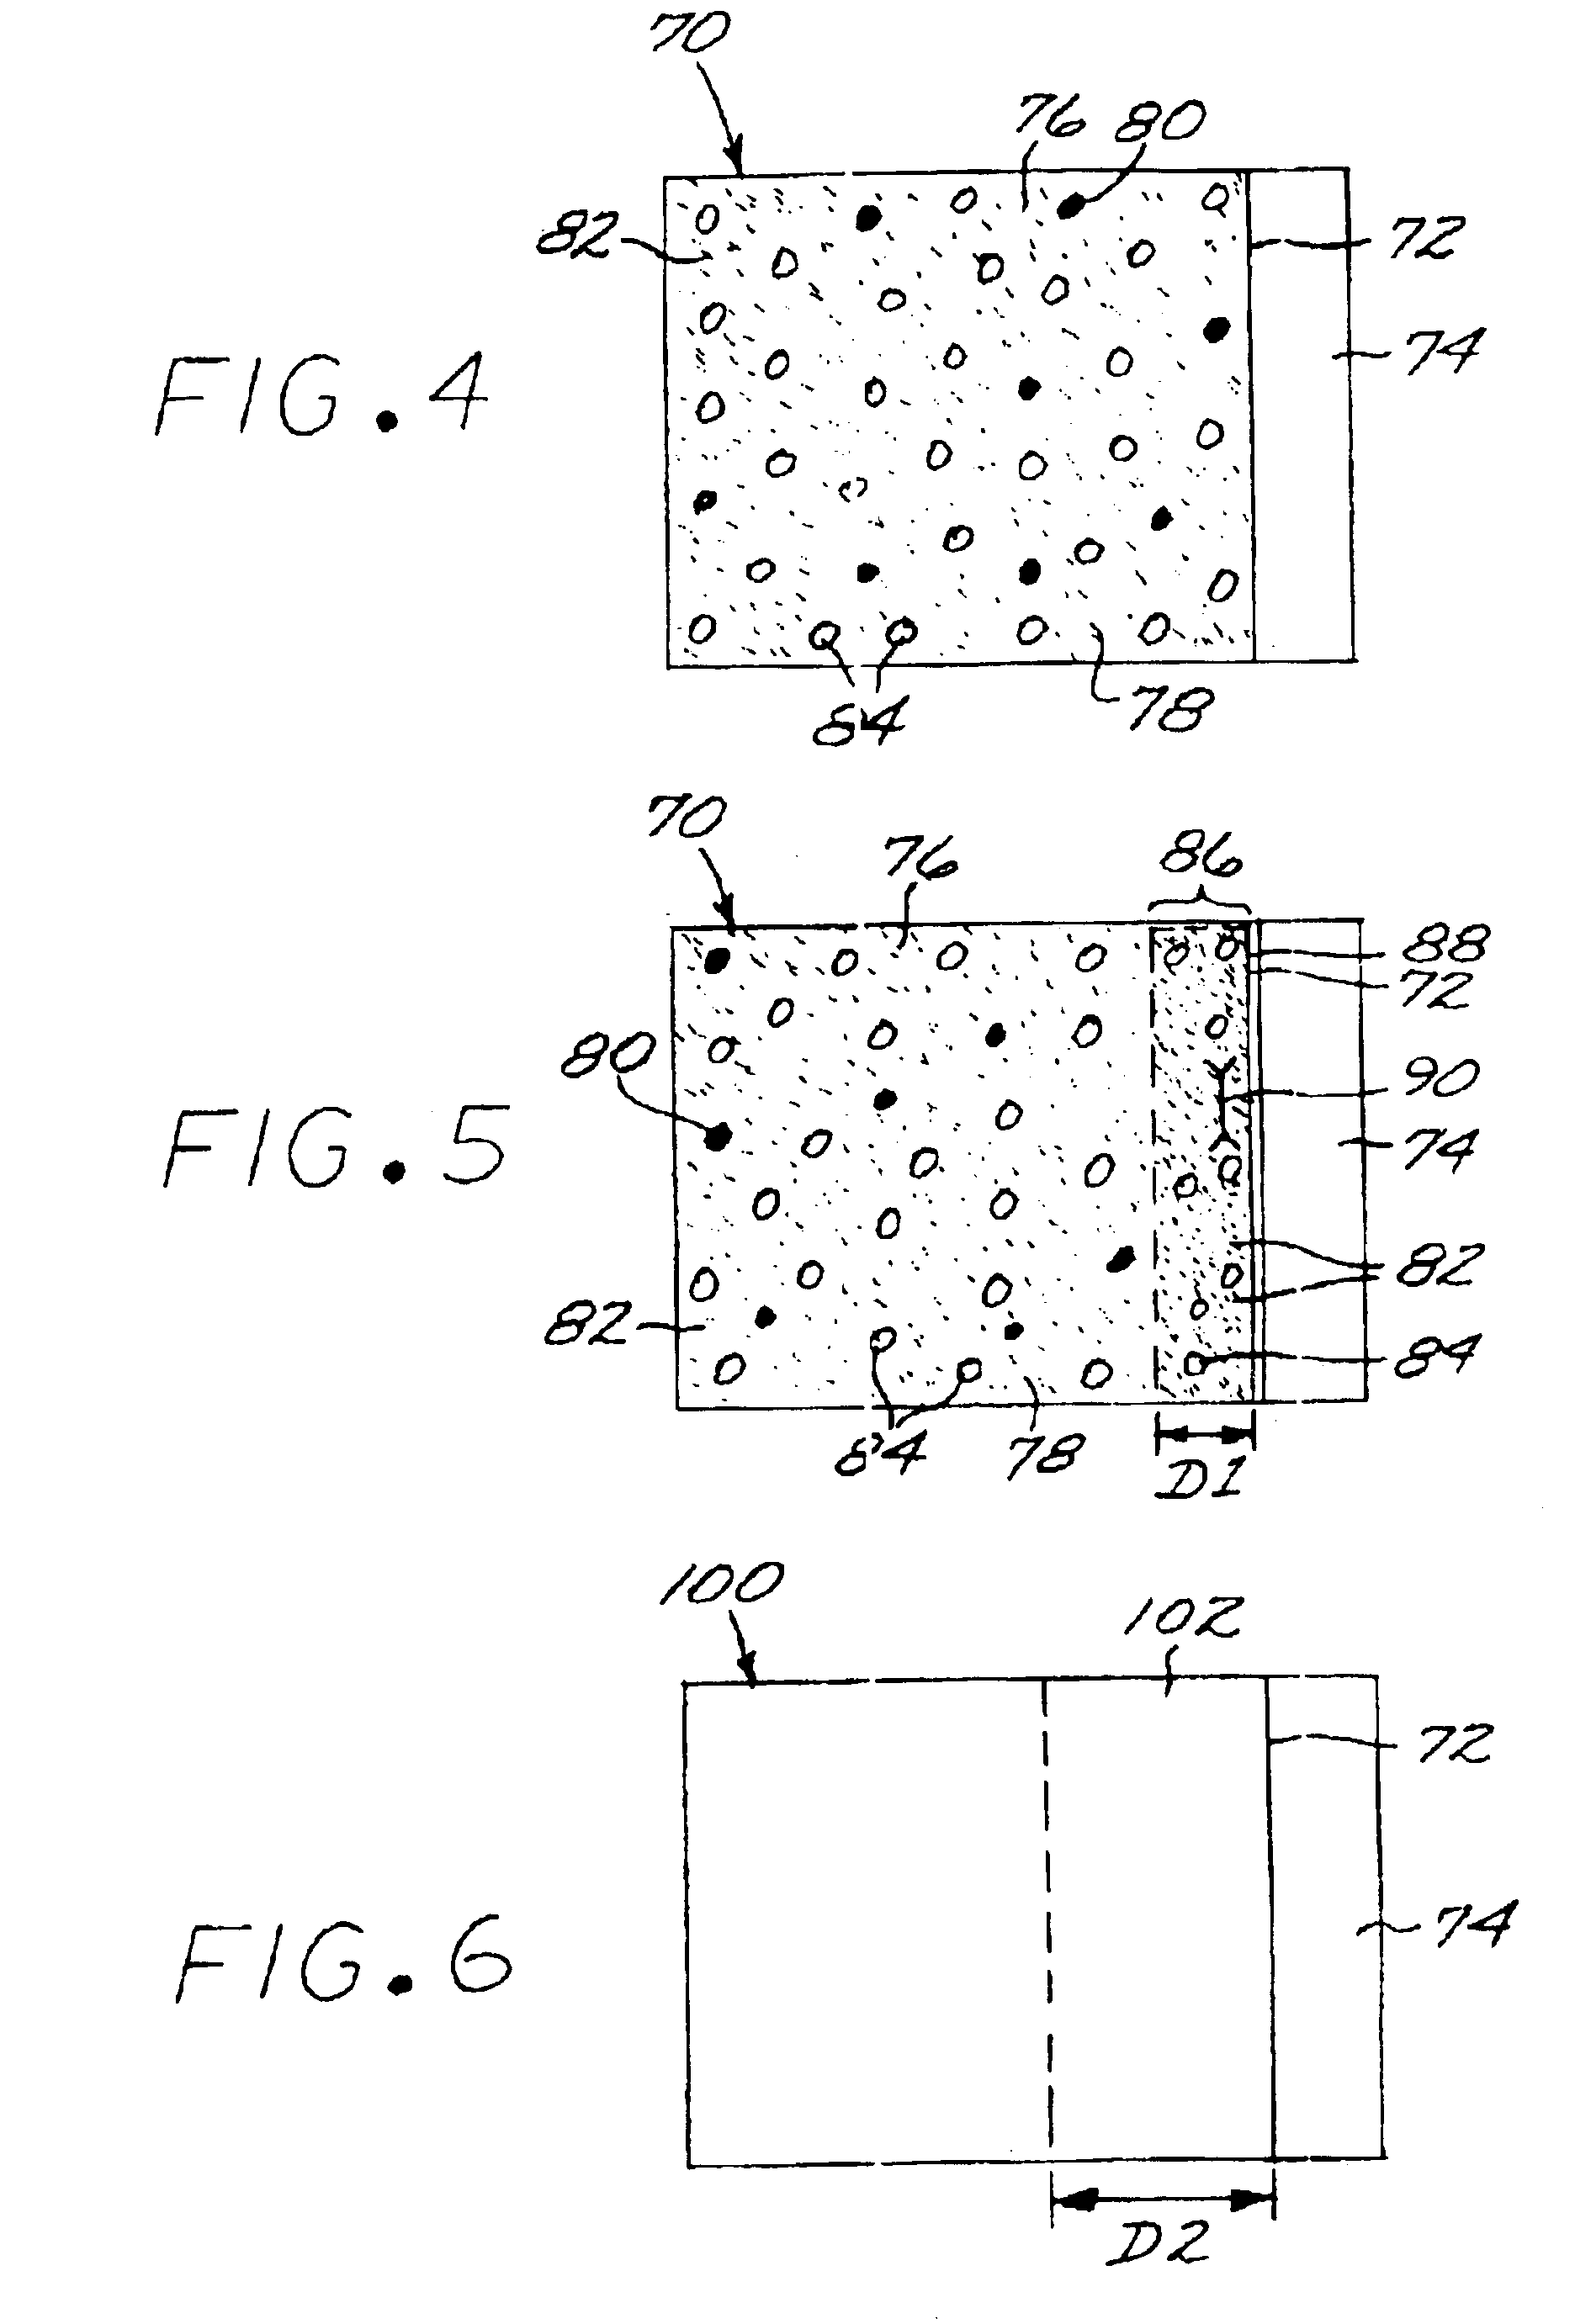 Method for preparing an article having a dispersoid distributed in a metallic matrix